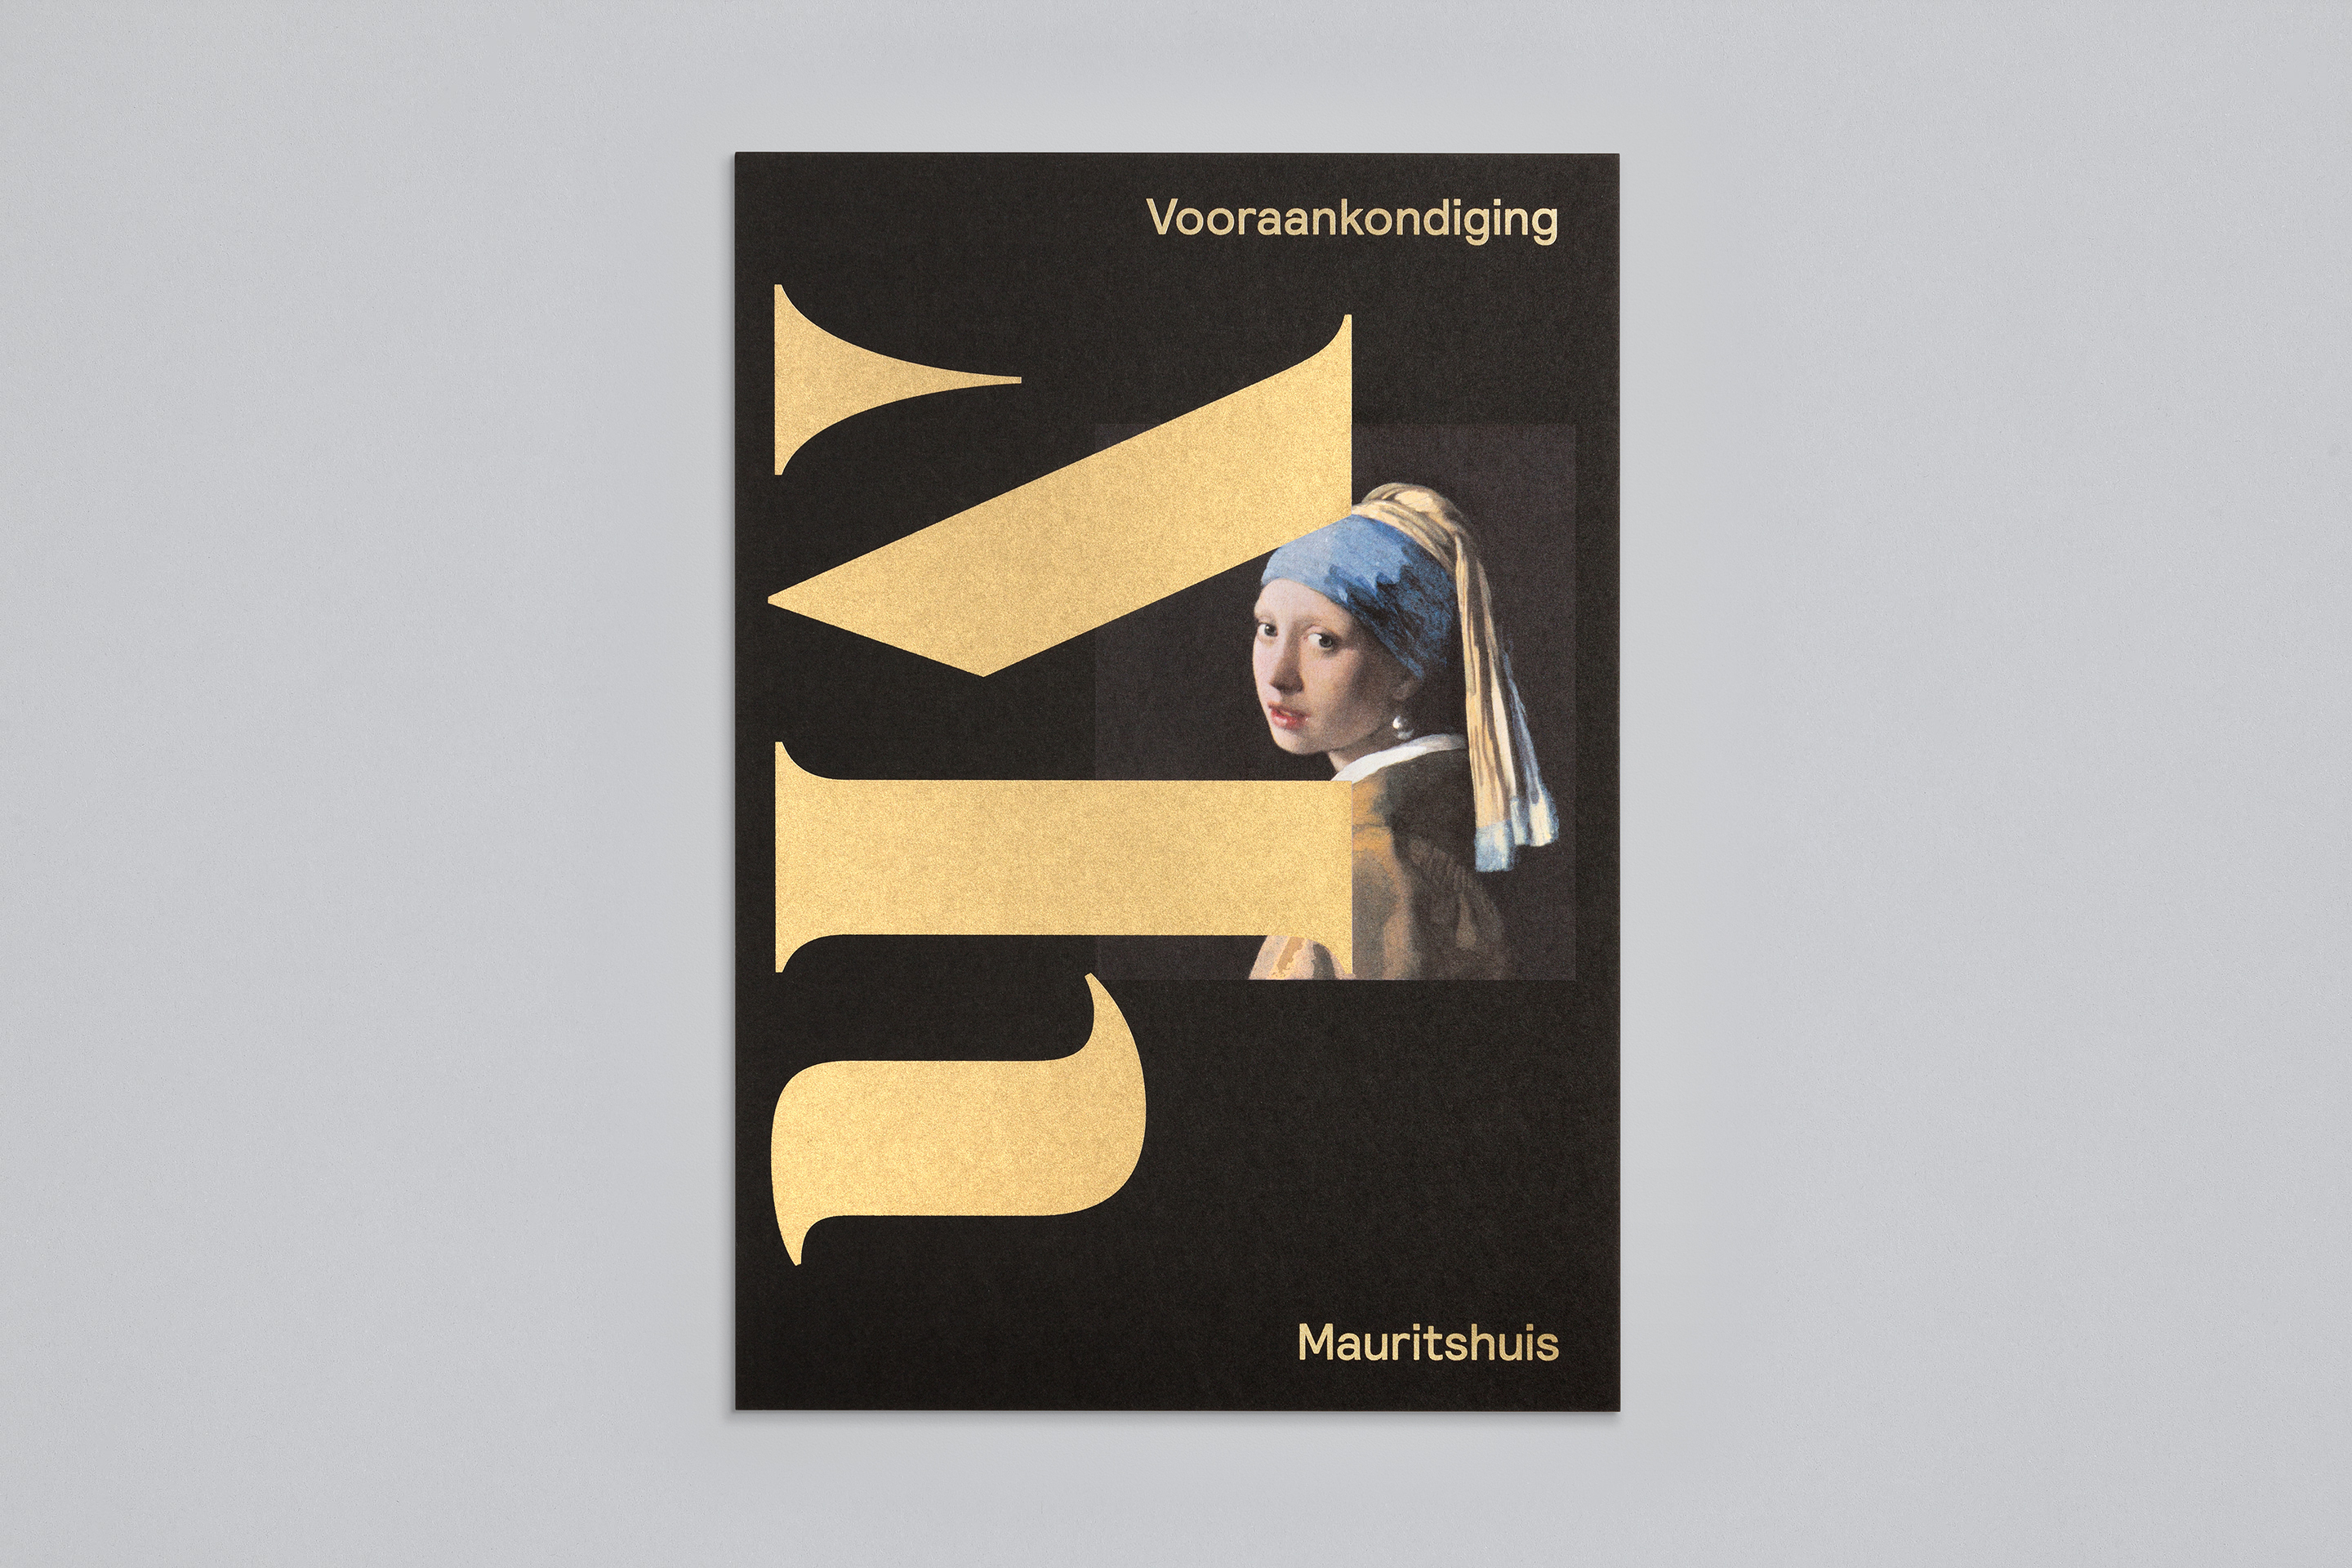 Monogram and print with metallic paper and spot colour detail designed by Dumbar for Mauritshuis